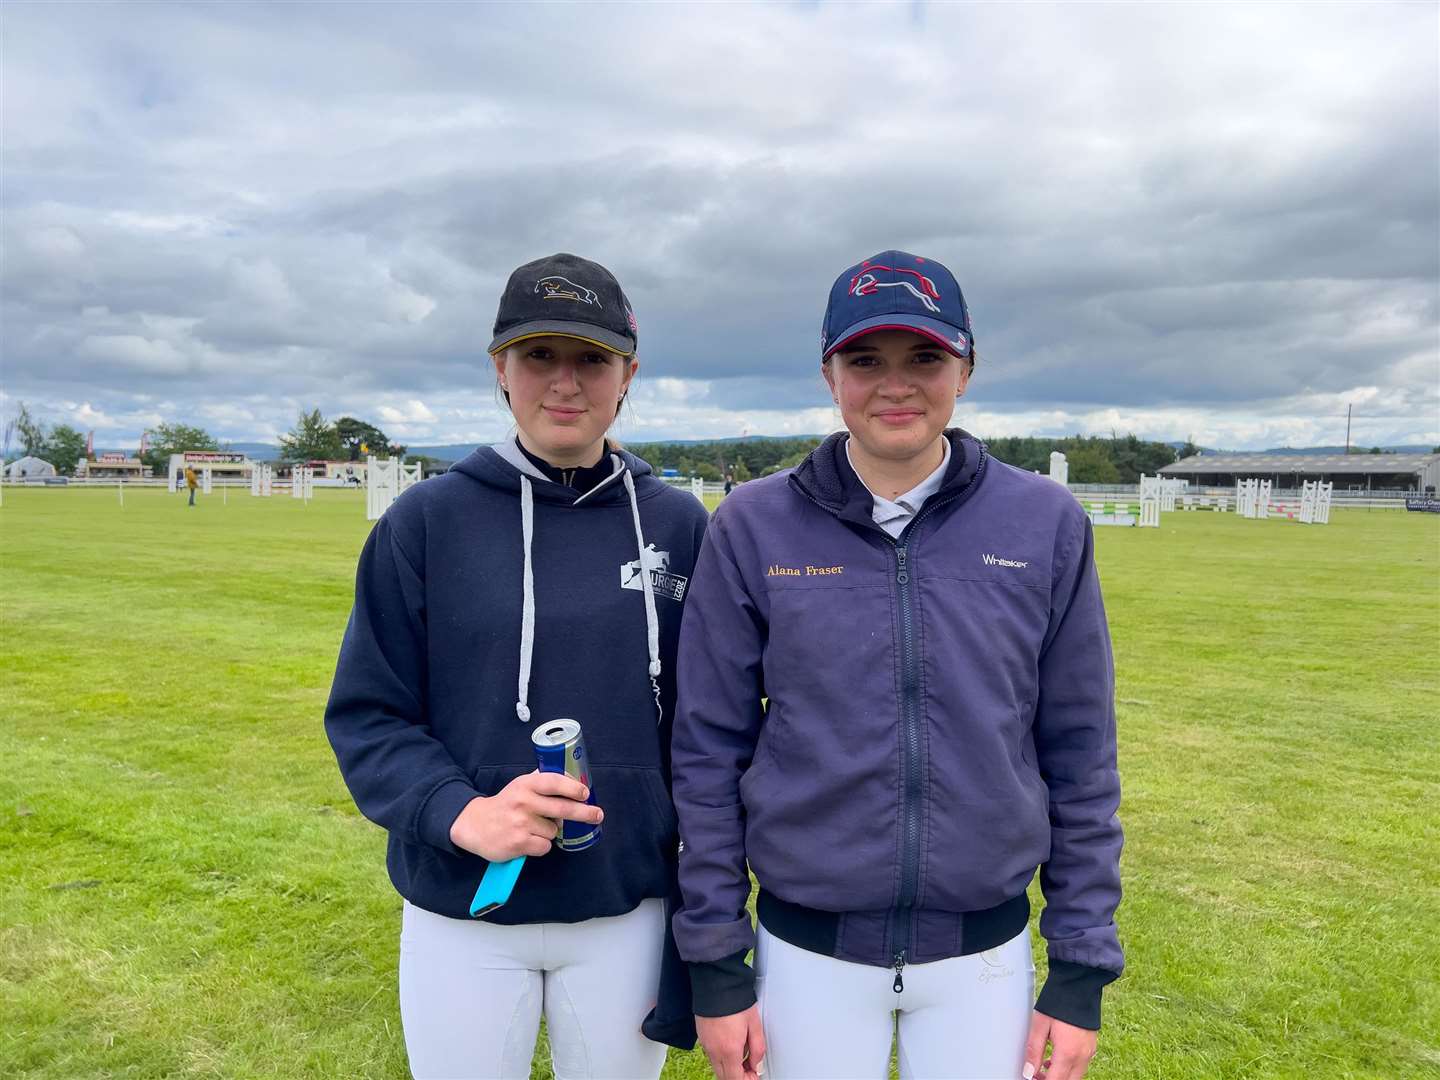 Waiting to take part in the show jumping Ginny Fraser and Alana Fraser. Picture: Callum Mackay